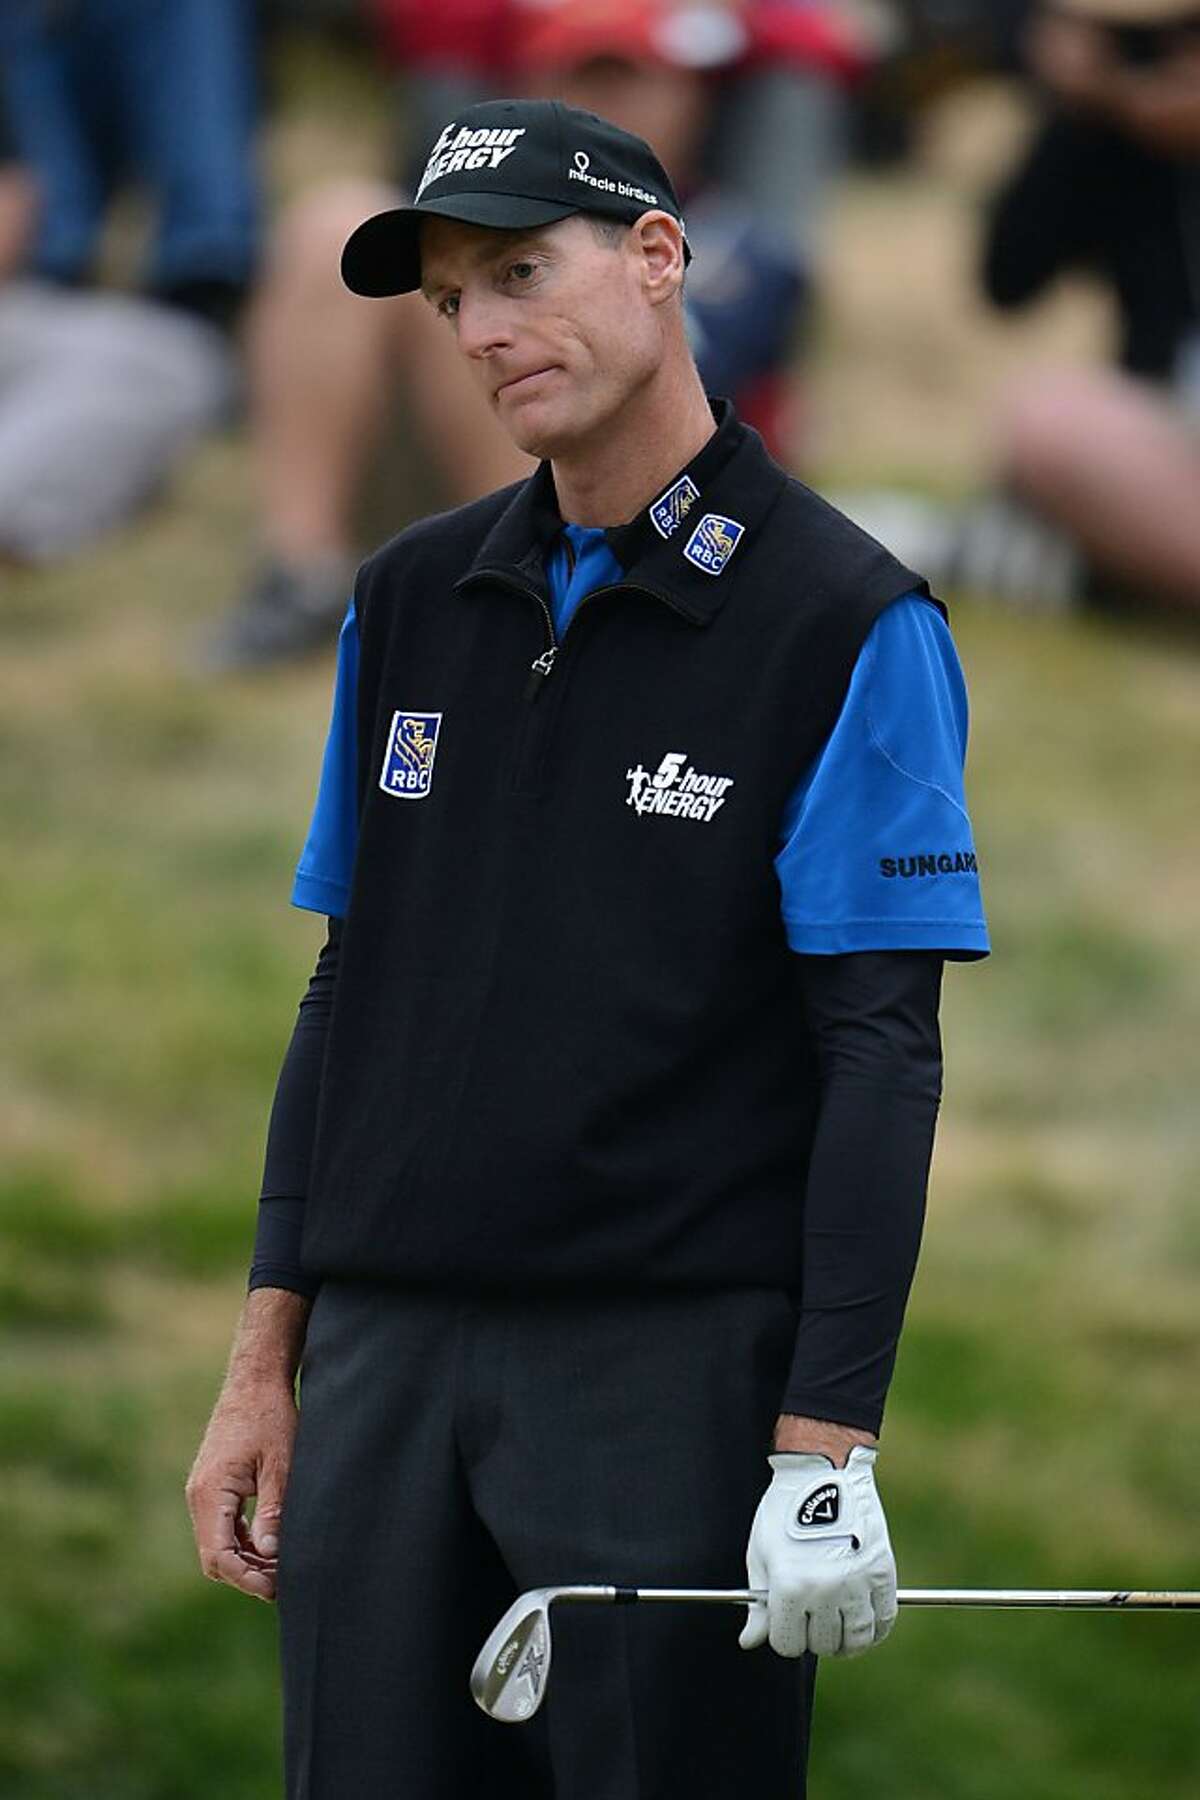 SAN FRANCISCO, CA - JUNE 17: Jim Furyk of the United States reacts to his bunker shot on the 18th hole during the final round of the 112th U.S. Open at The Olympic Club on June 17, 2012 in San Francisco, California. (Photo by Stuart Franklin/Getty Images)